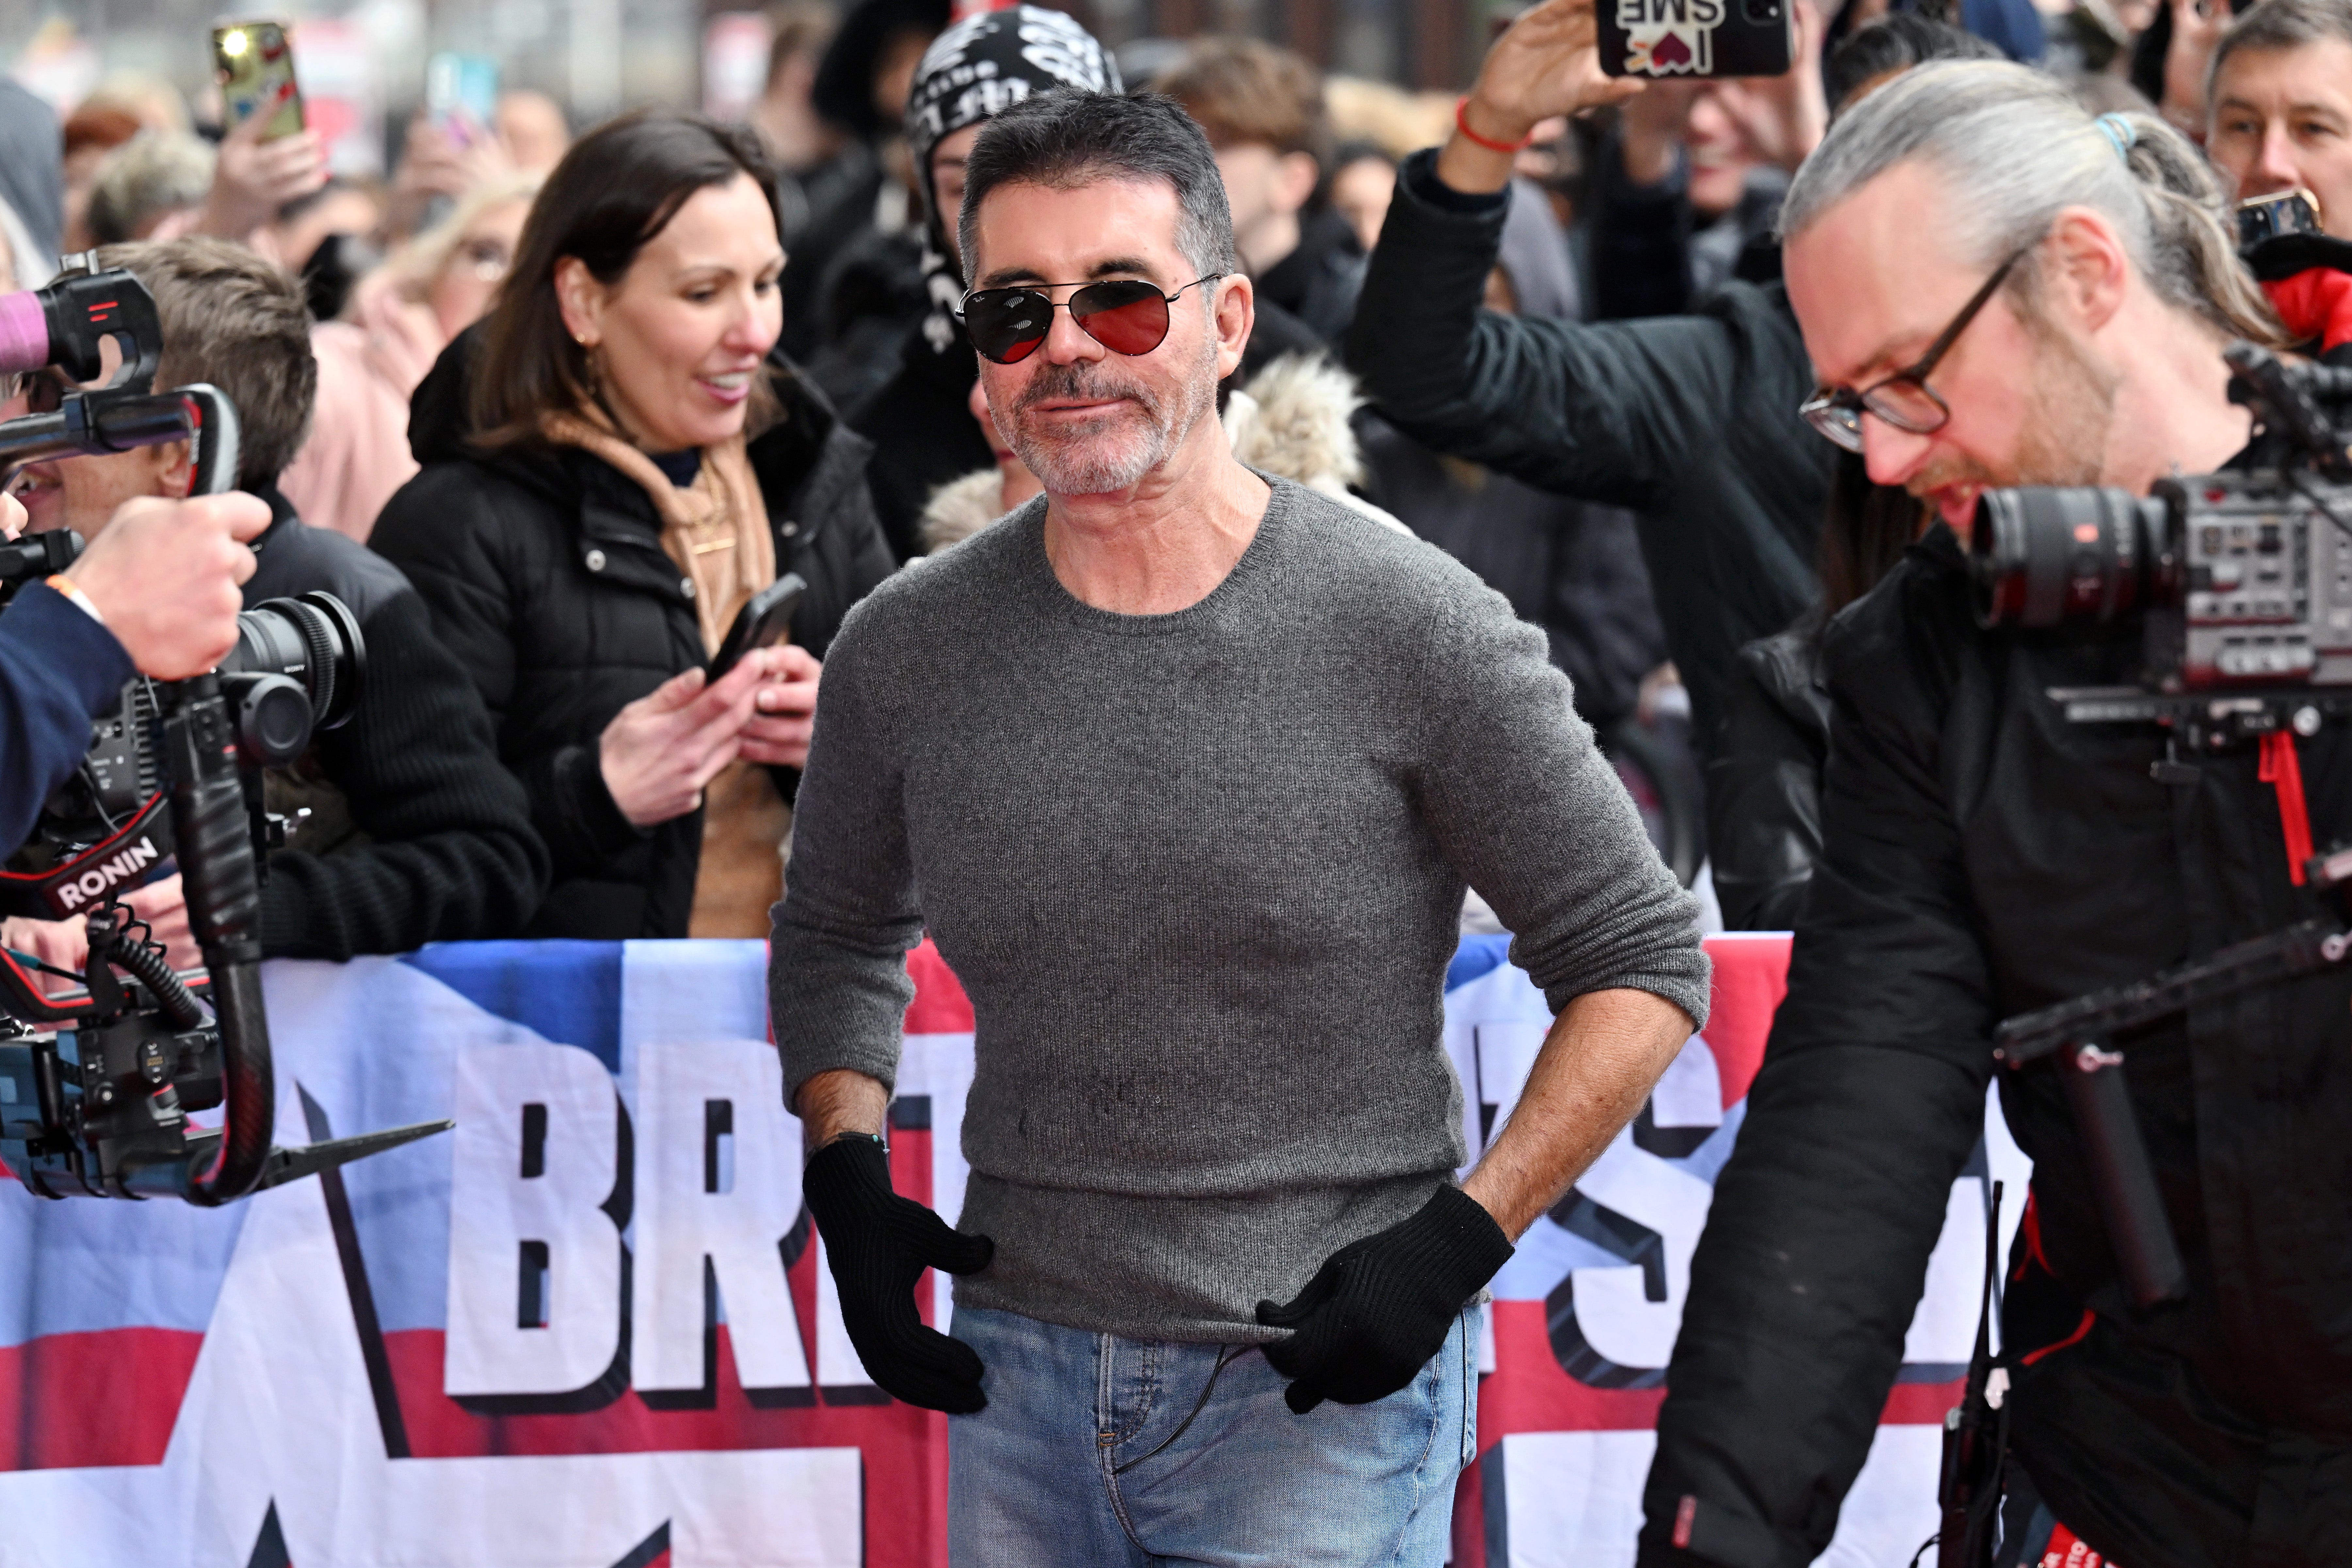 Simon Cowell brushed off comments Sharon Osbourne made on ‘Celebrity Big Brother’